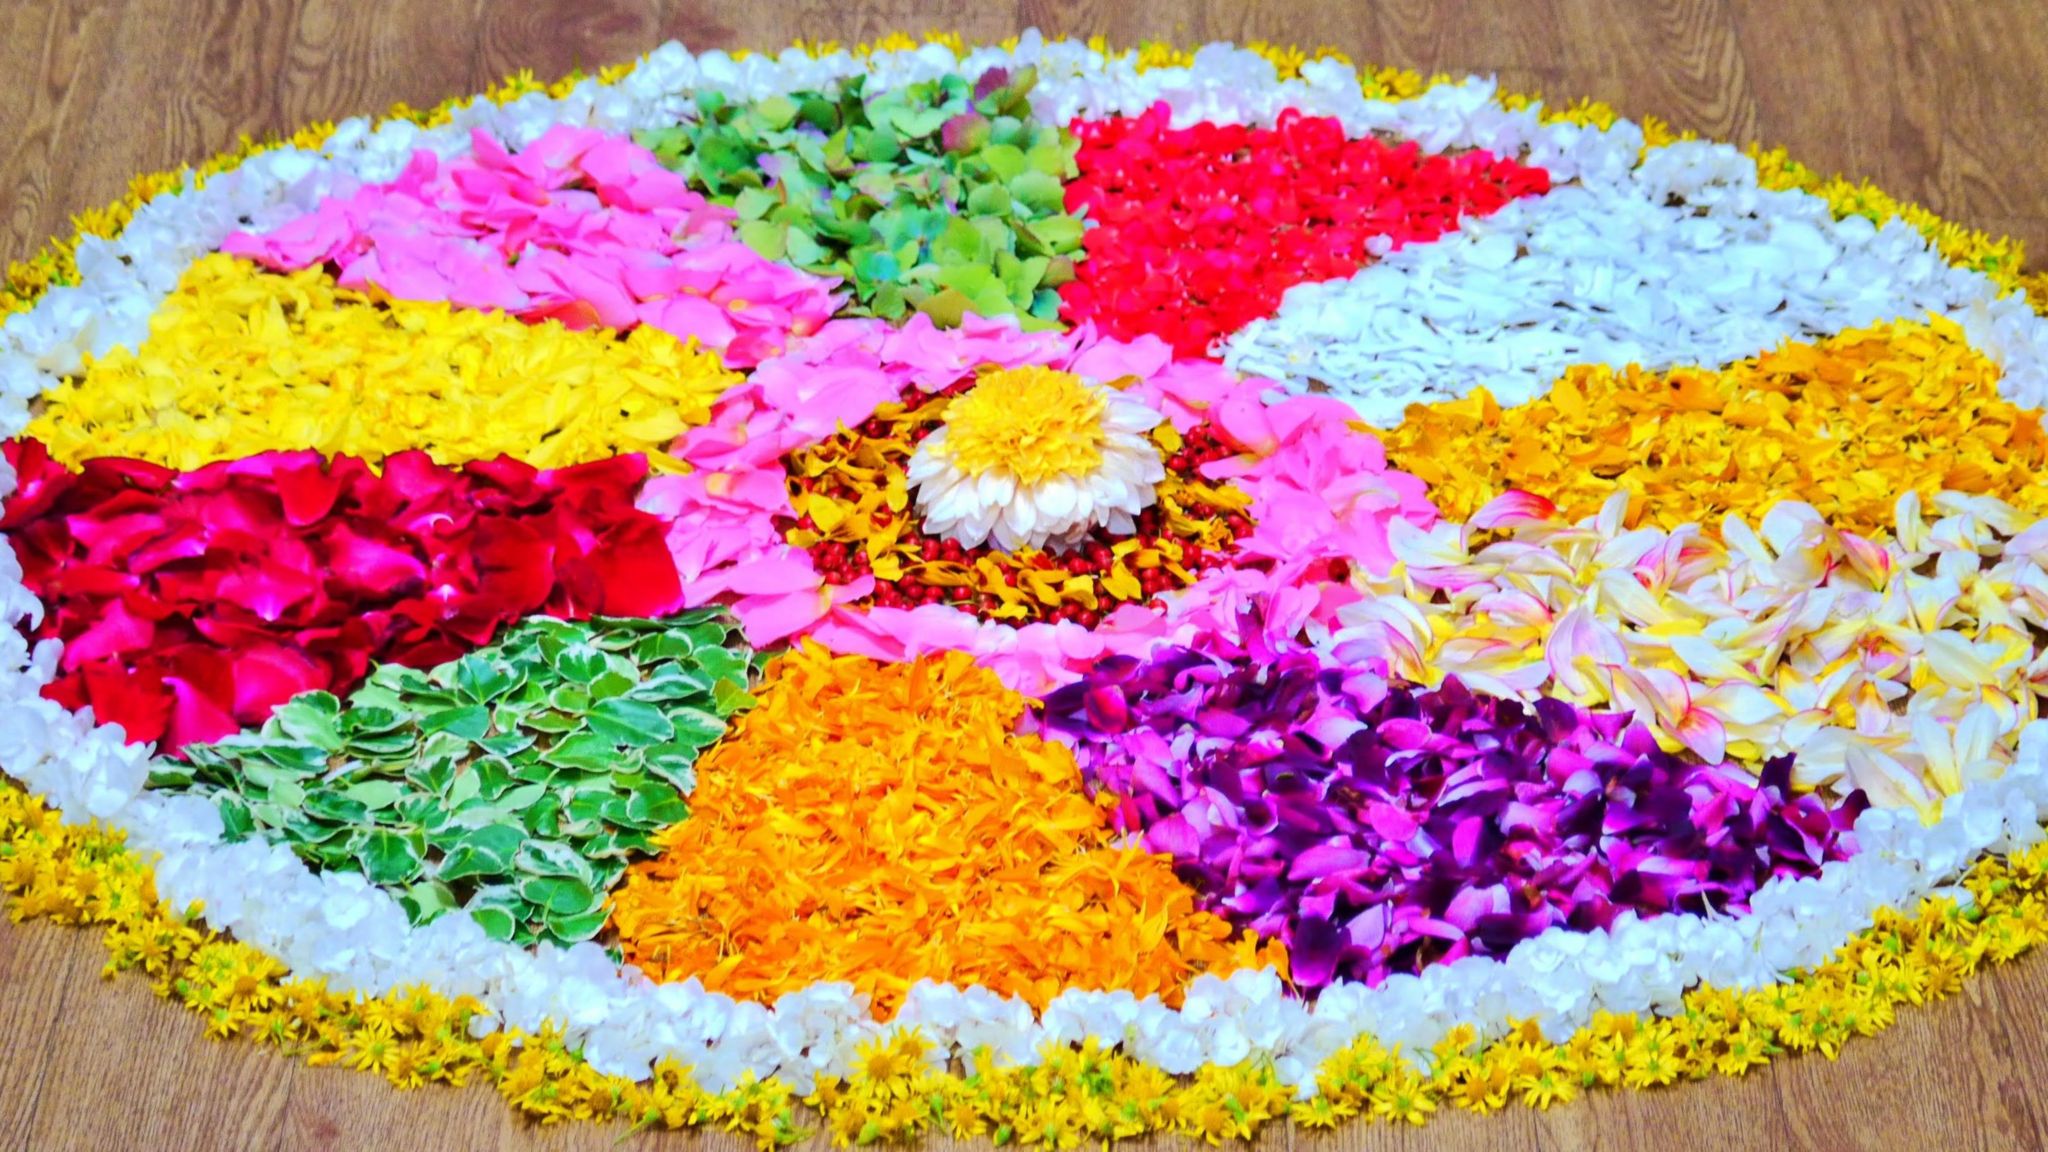 A "pooklam" the decoration of intricate flower carpets 